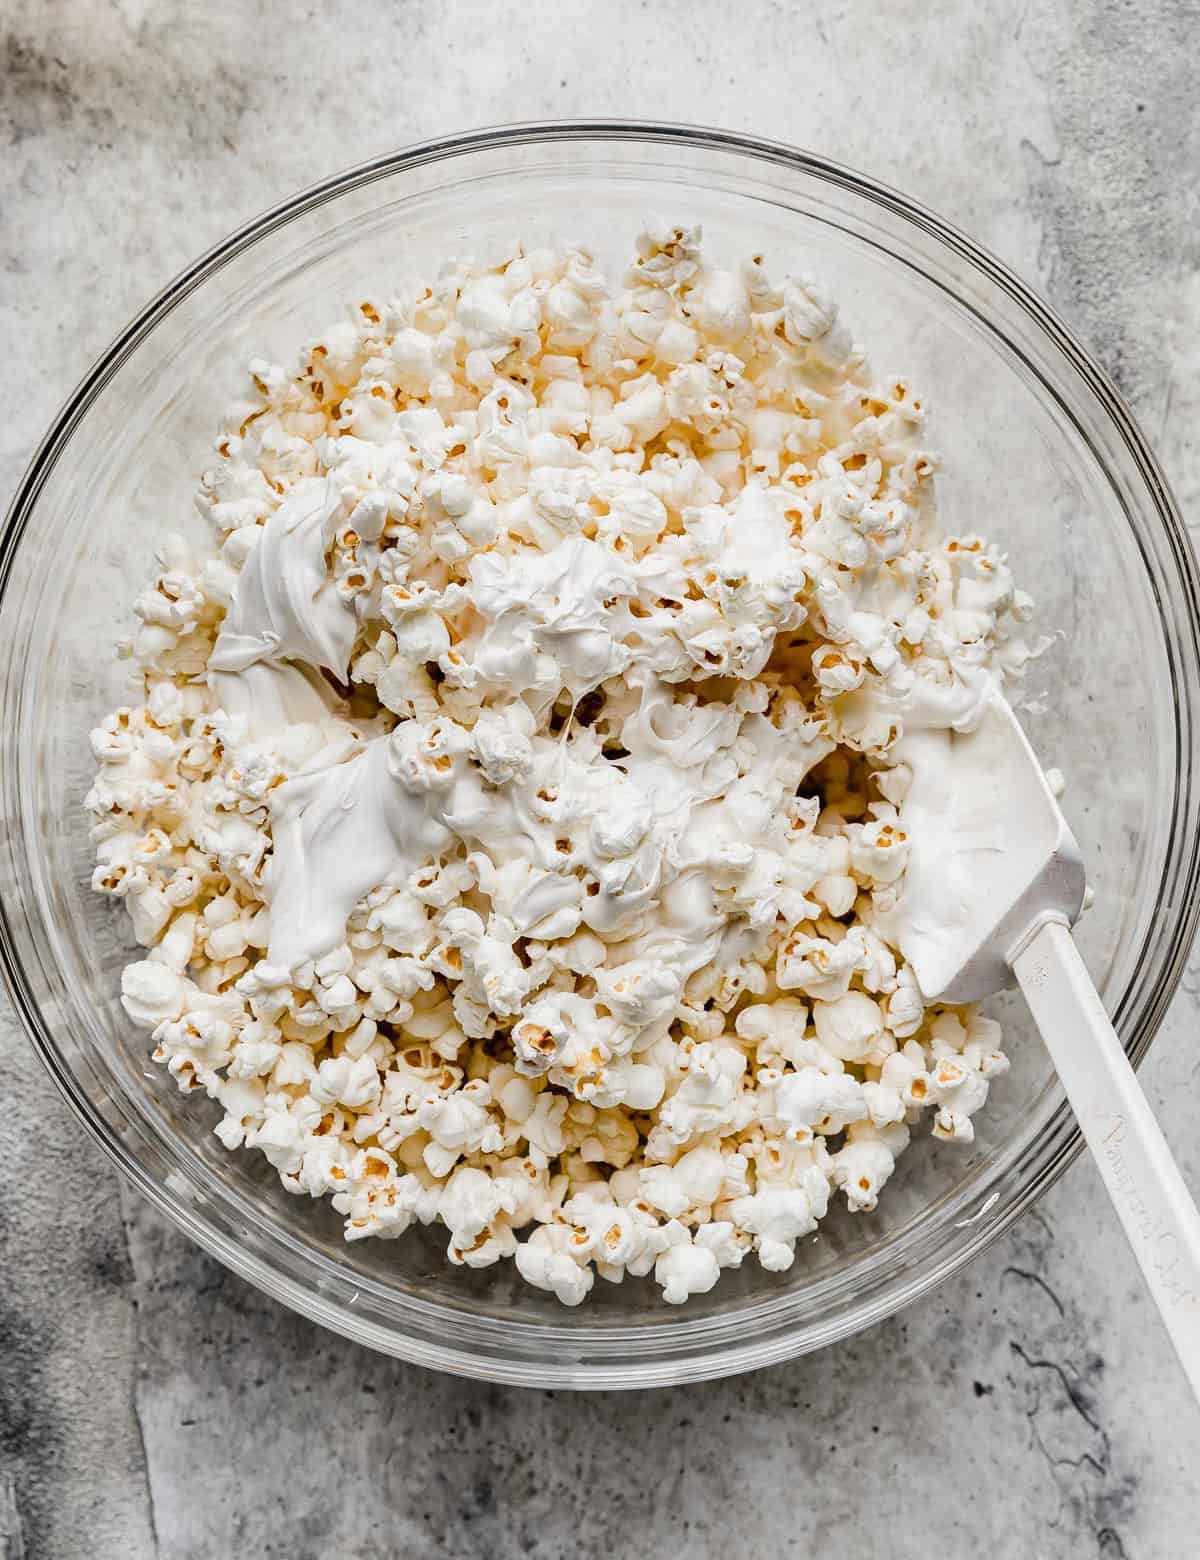 White chocolate covered popcorn (making Oreo Popcorn) in a glass bowl.